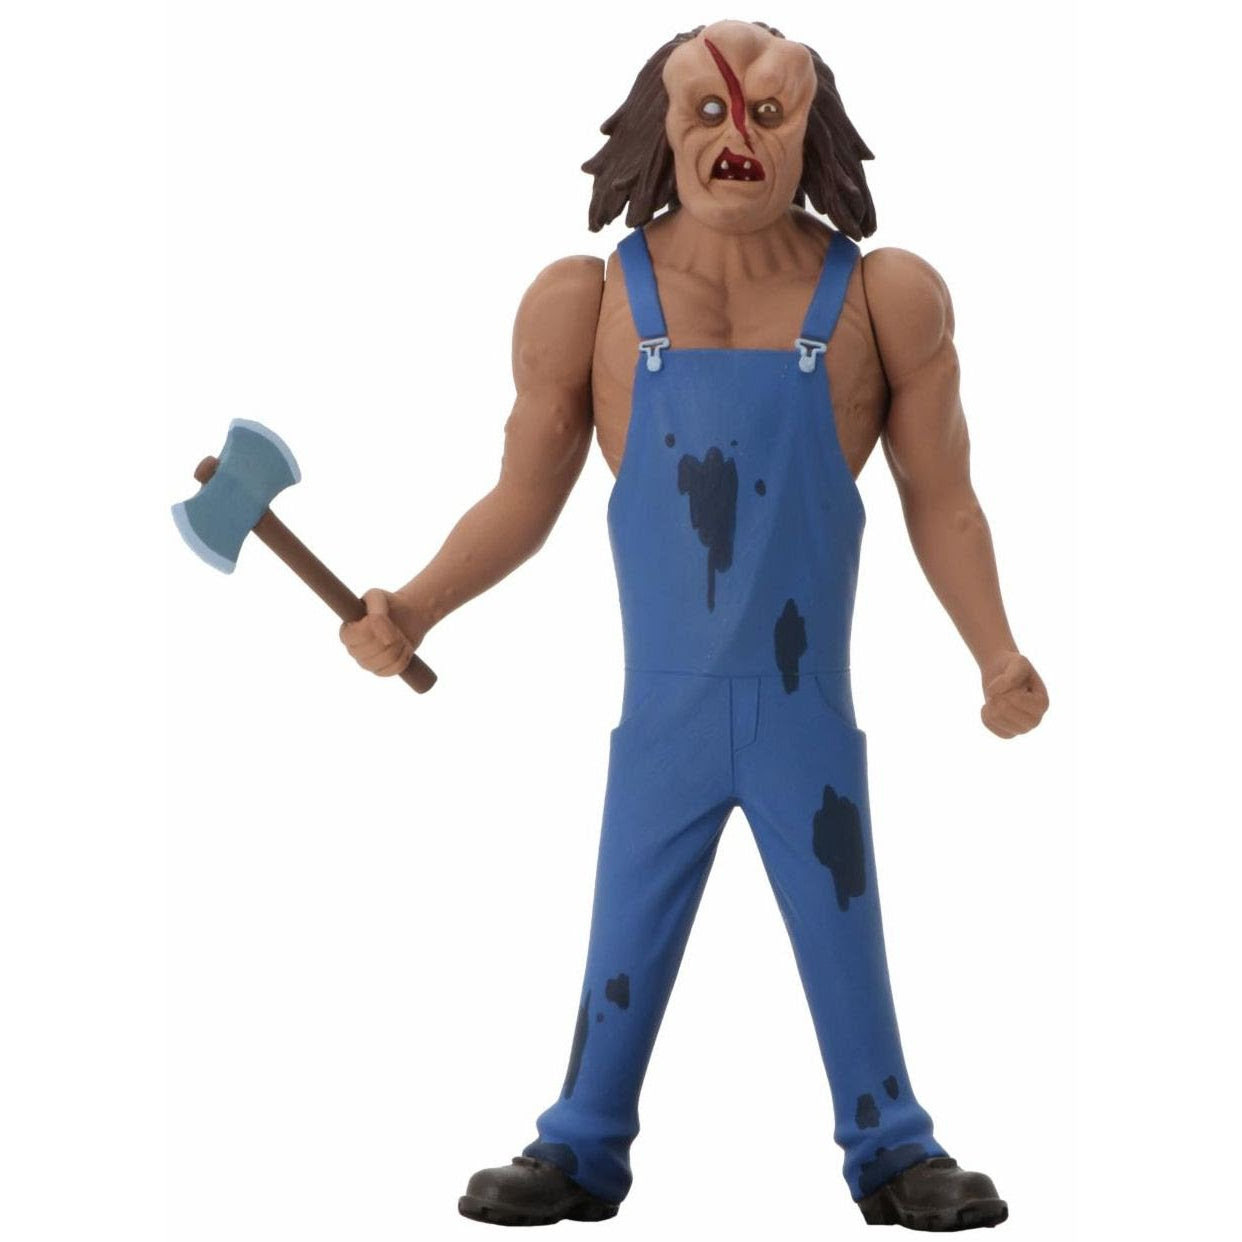 Image of Toony Terrors 6” Scale Action Figure Series 4 - Victor Crowley (Hatchet) - JULY 2020